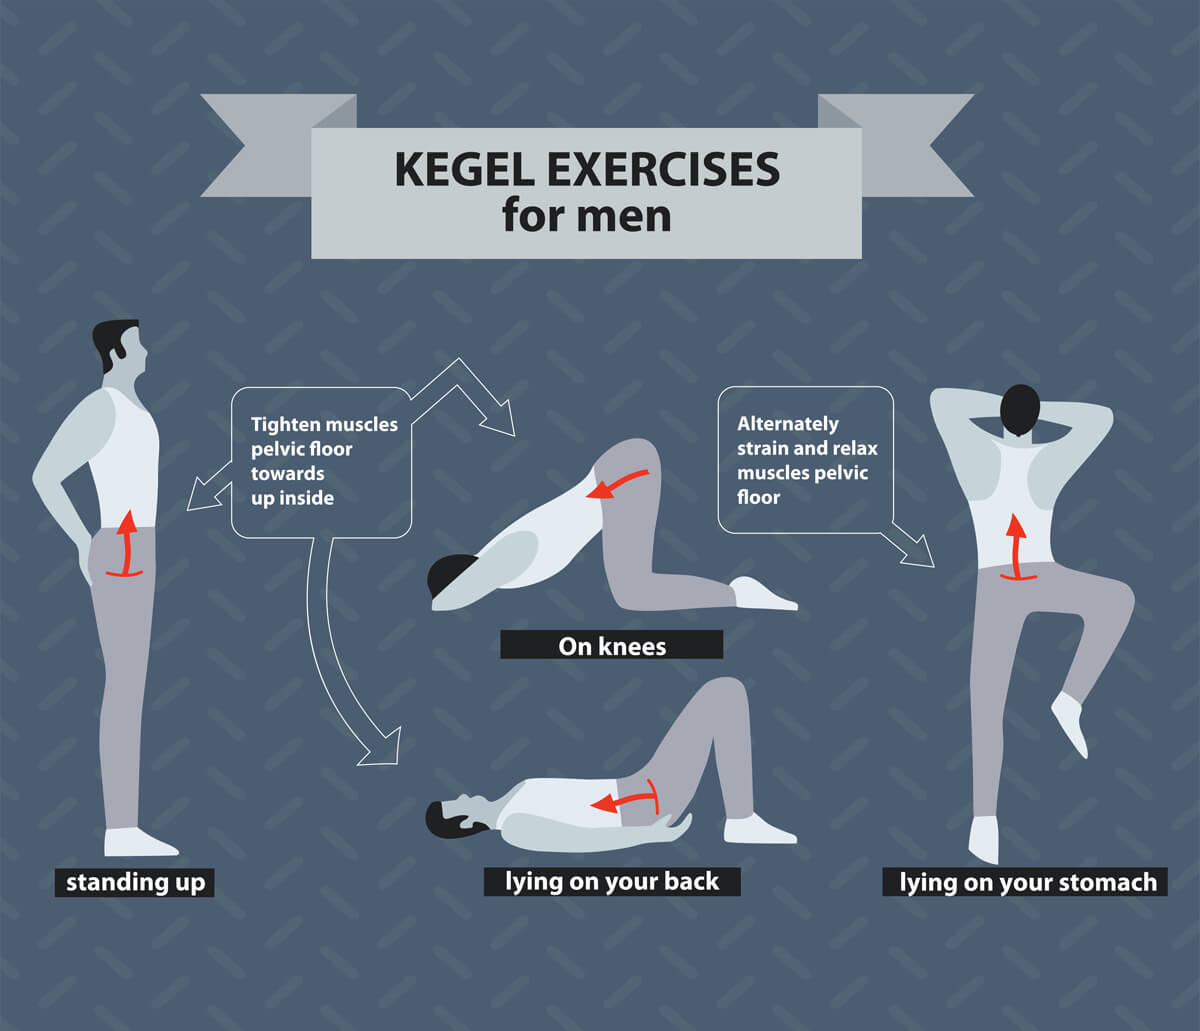 Benefits and How to Do Kegel Exercises, by Delfin Jefriansyah